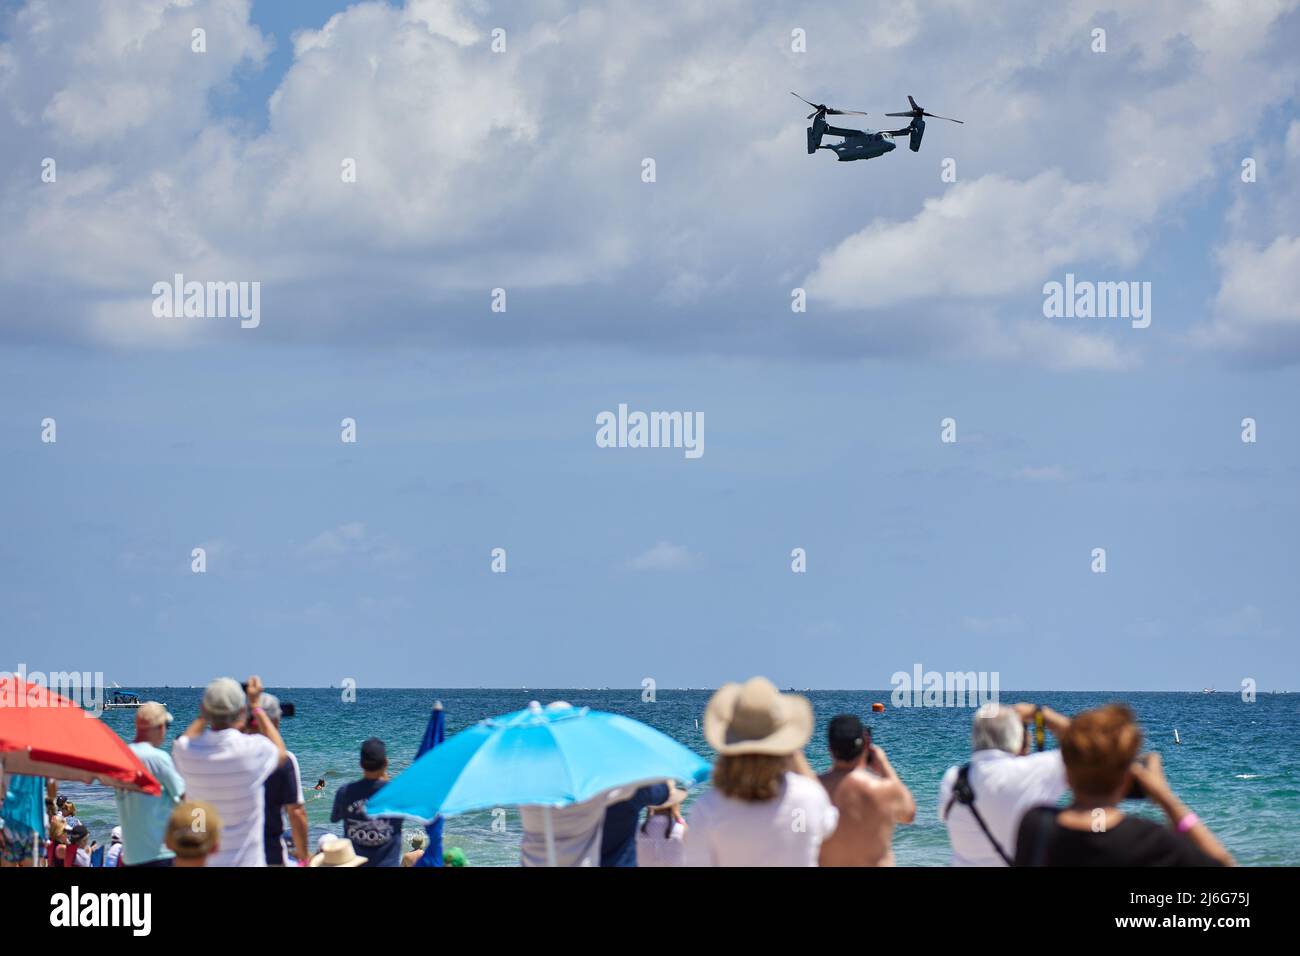 Fort Lauderdale, FL, USA. 1st May 2022. 2022 Fort Lauderdale Air Show. Air Show  returns to Fort Lauderdale on April 30 – May 1, 2022 as the Fort Lauderdale Air Show soars once again featuring the U.S. Air Force Thunderbirds. U.S. Air Force fighter jet demonstration teams aboard the F-22 Raptor, F-35 Lighting II, F-16 Viper and A-10 Thunderbolt II. Credit: Yaroslav Sabitov/YES Market Media/Alamy Live News Stock Photo